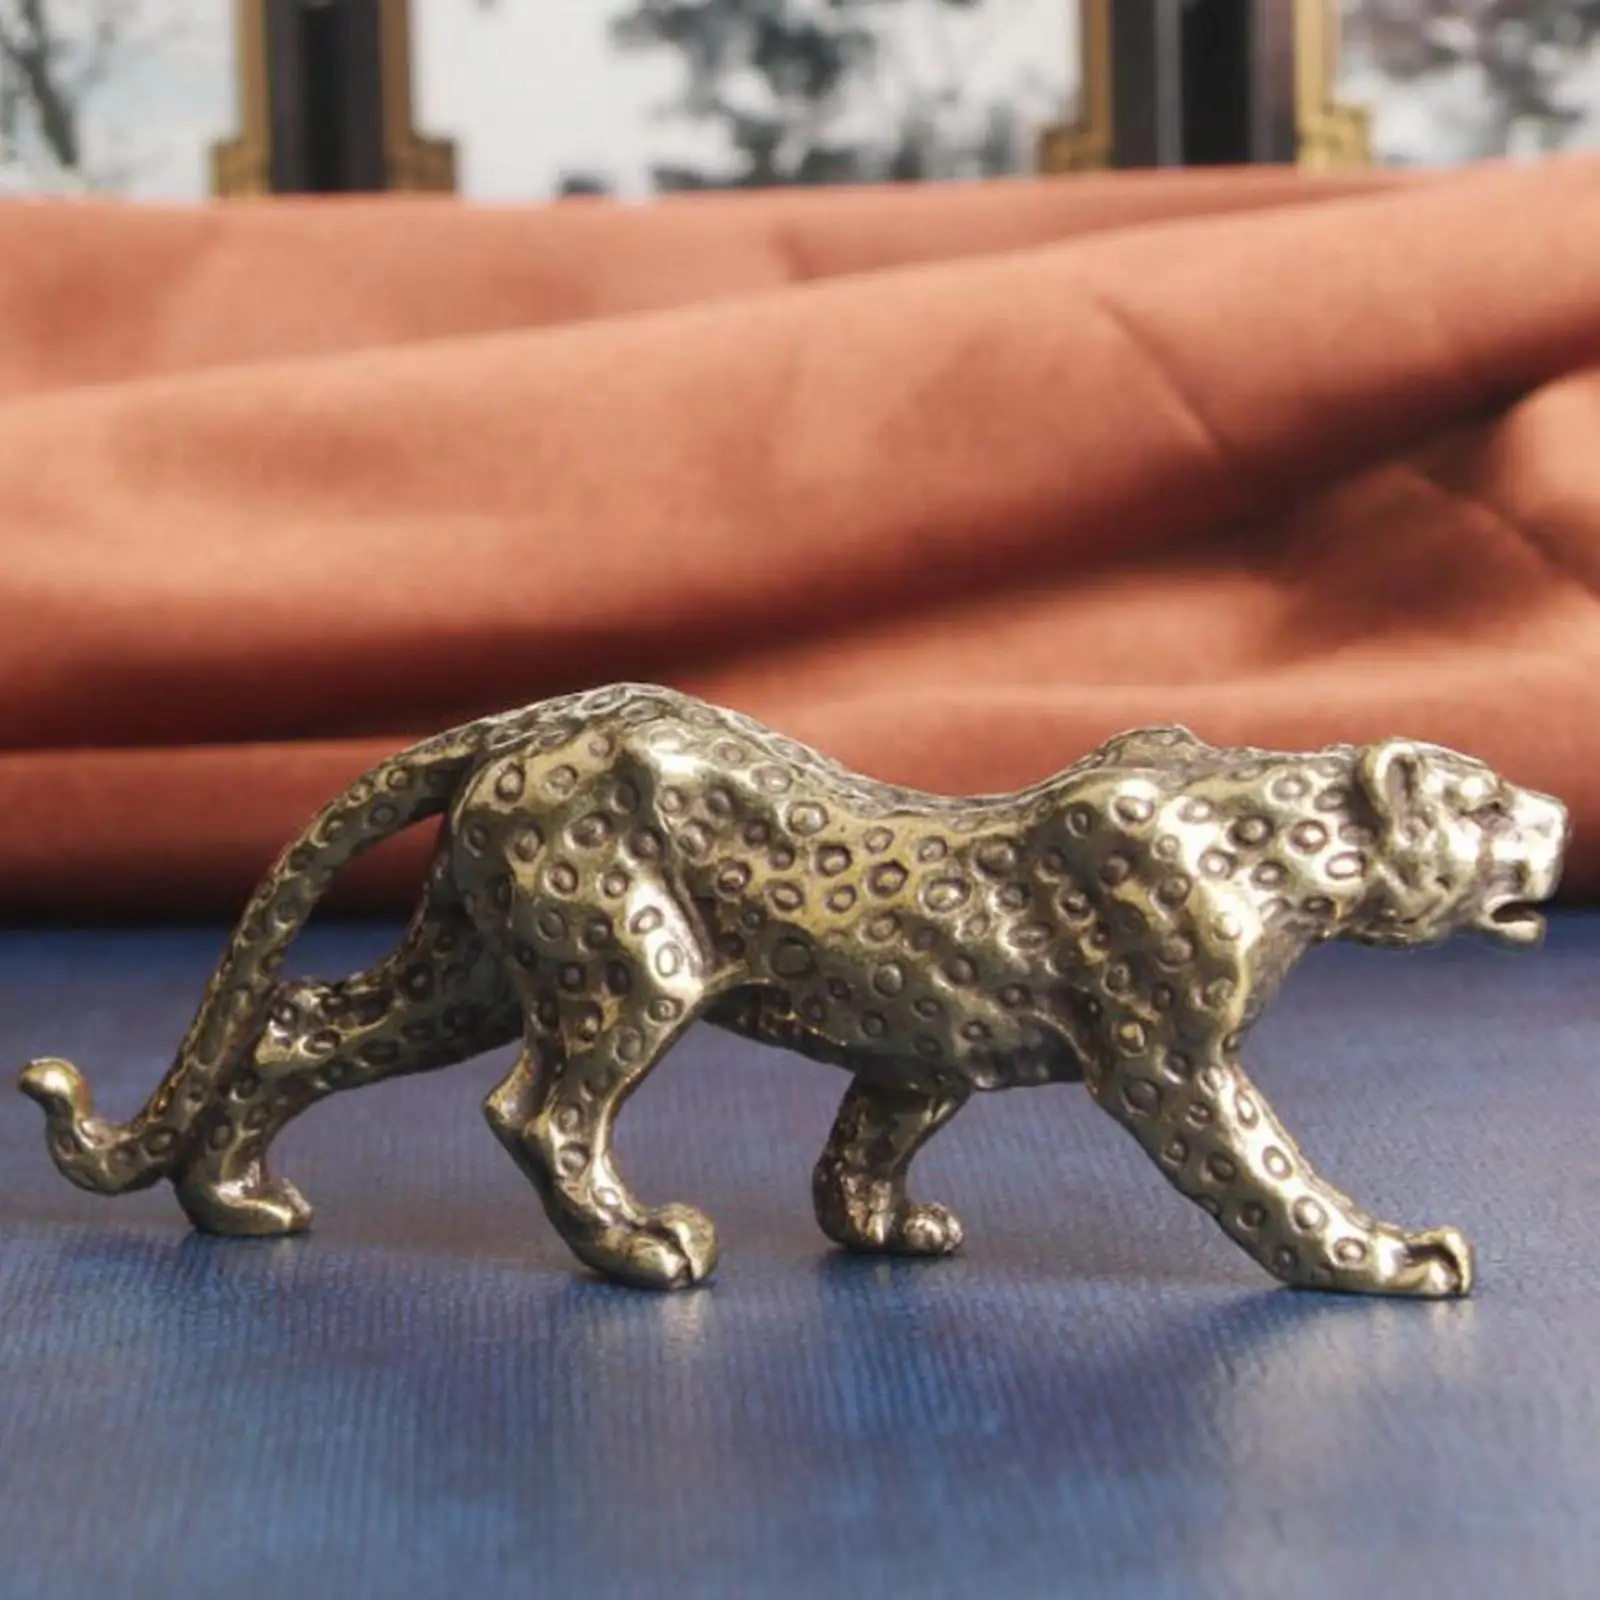 Vintage Leopard Statue Panther Figurine Brass Exquisite Statuette Animal Sculpture for Home Office Outdoor Bookshelf Decoration